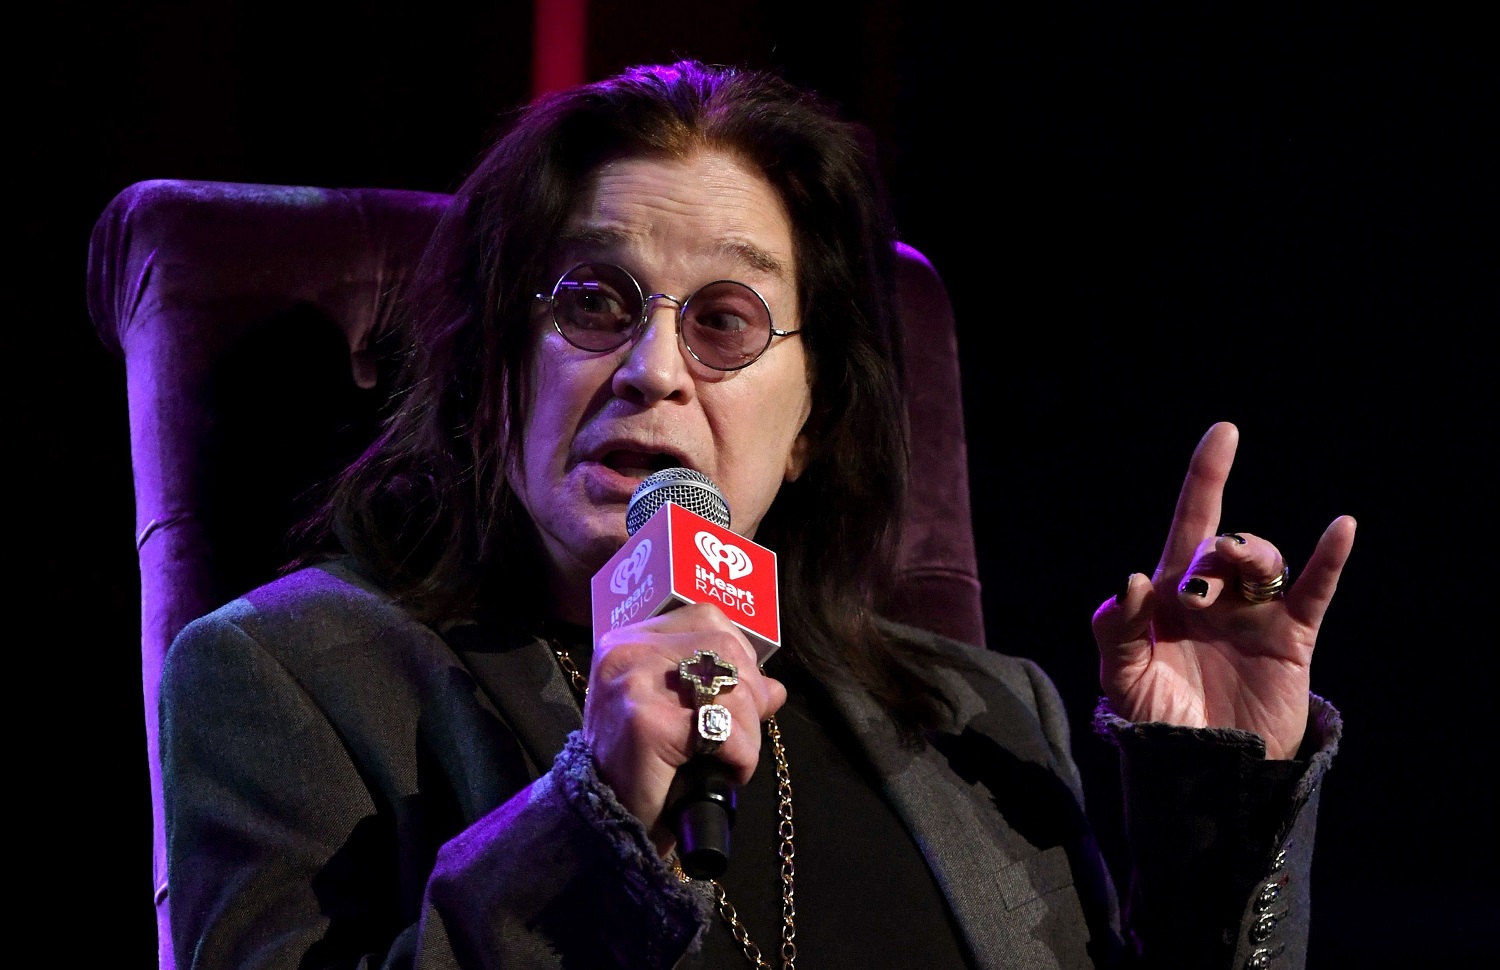 Ozzy Osbourne is being inducted into the WWE Hall of Fame